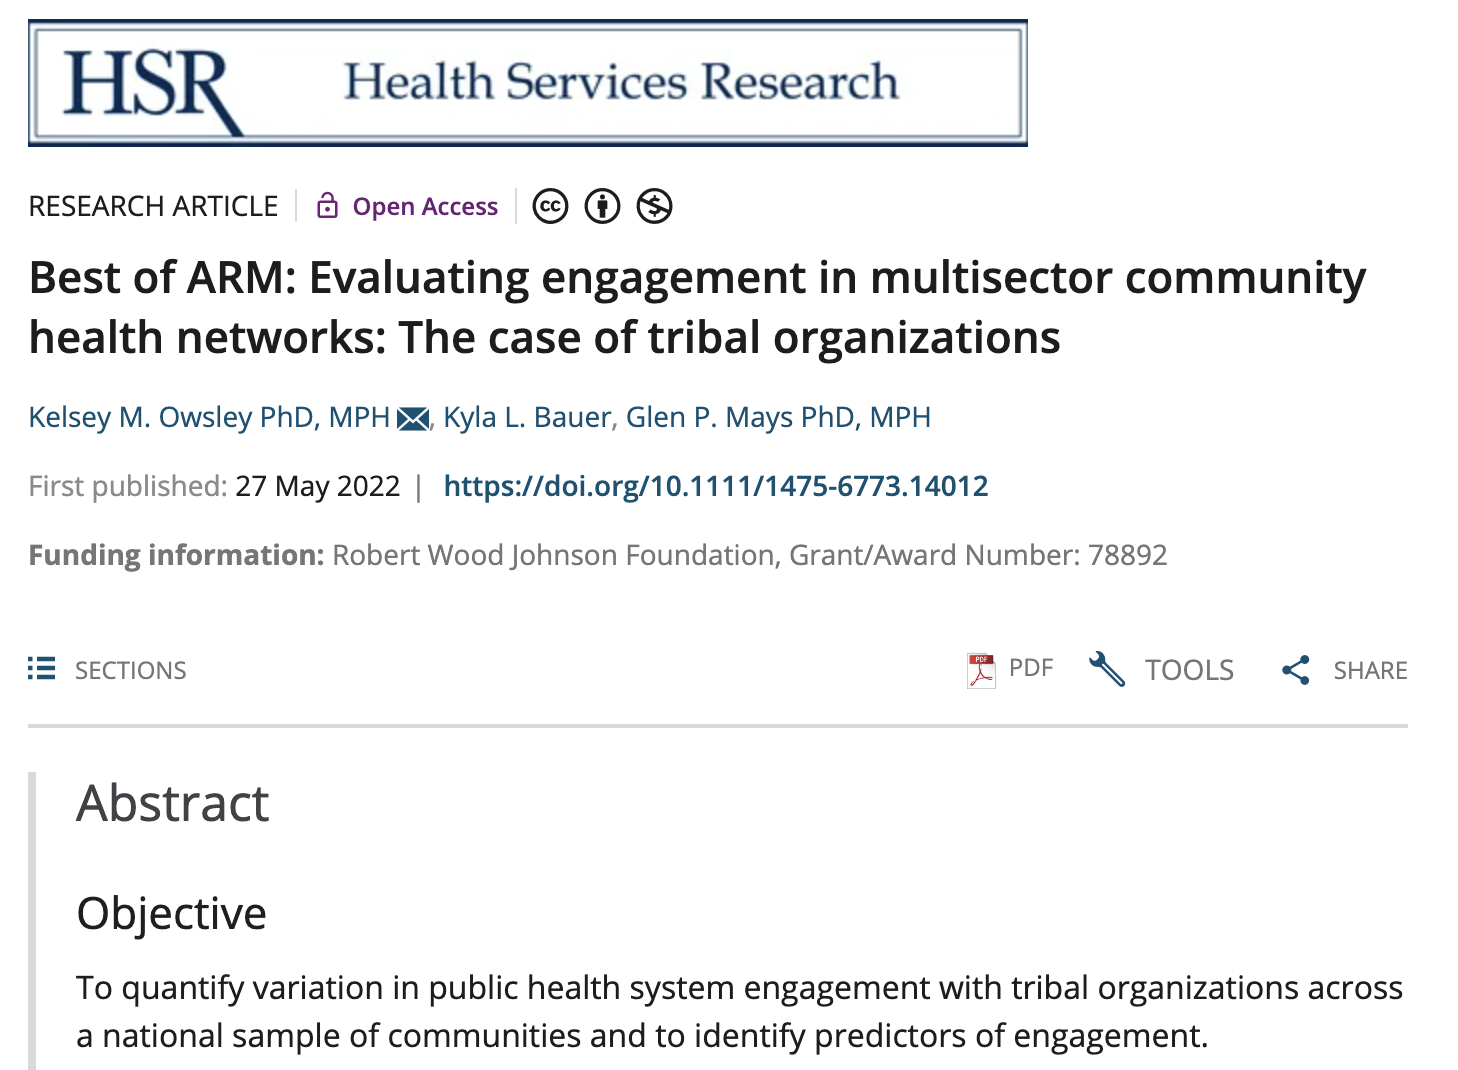 Best of ARM: Evaluating Engagement in Multi-Sector Community Health Networks: The Case of Tribal Organizations